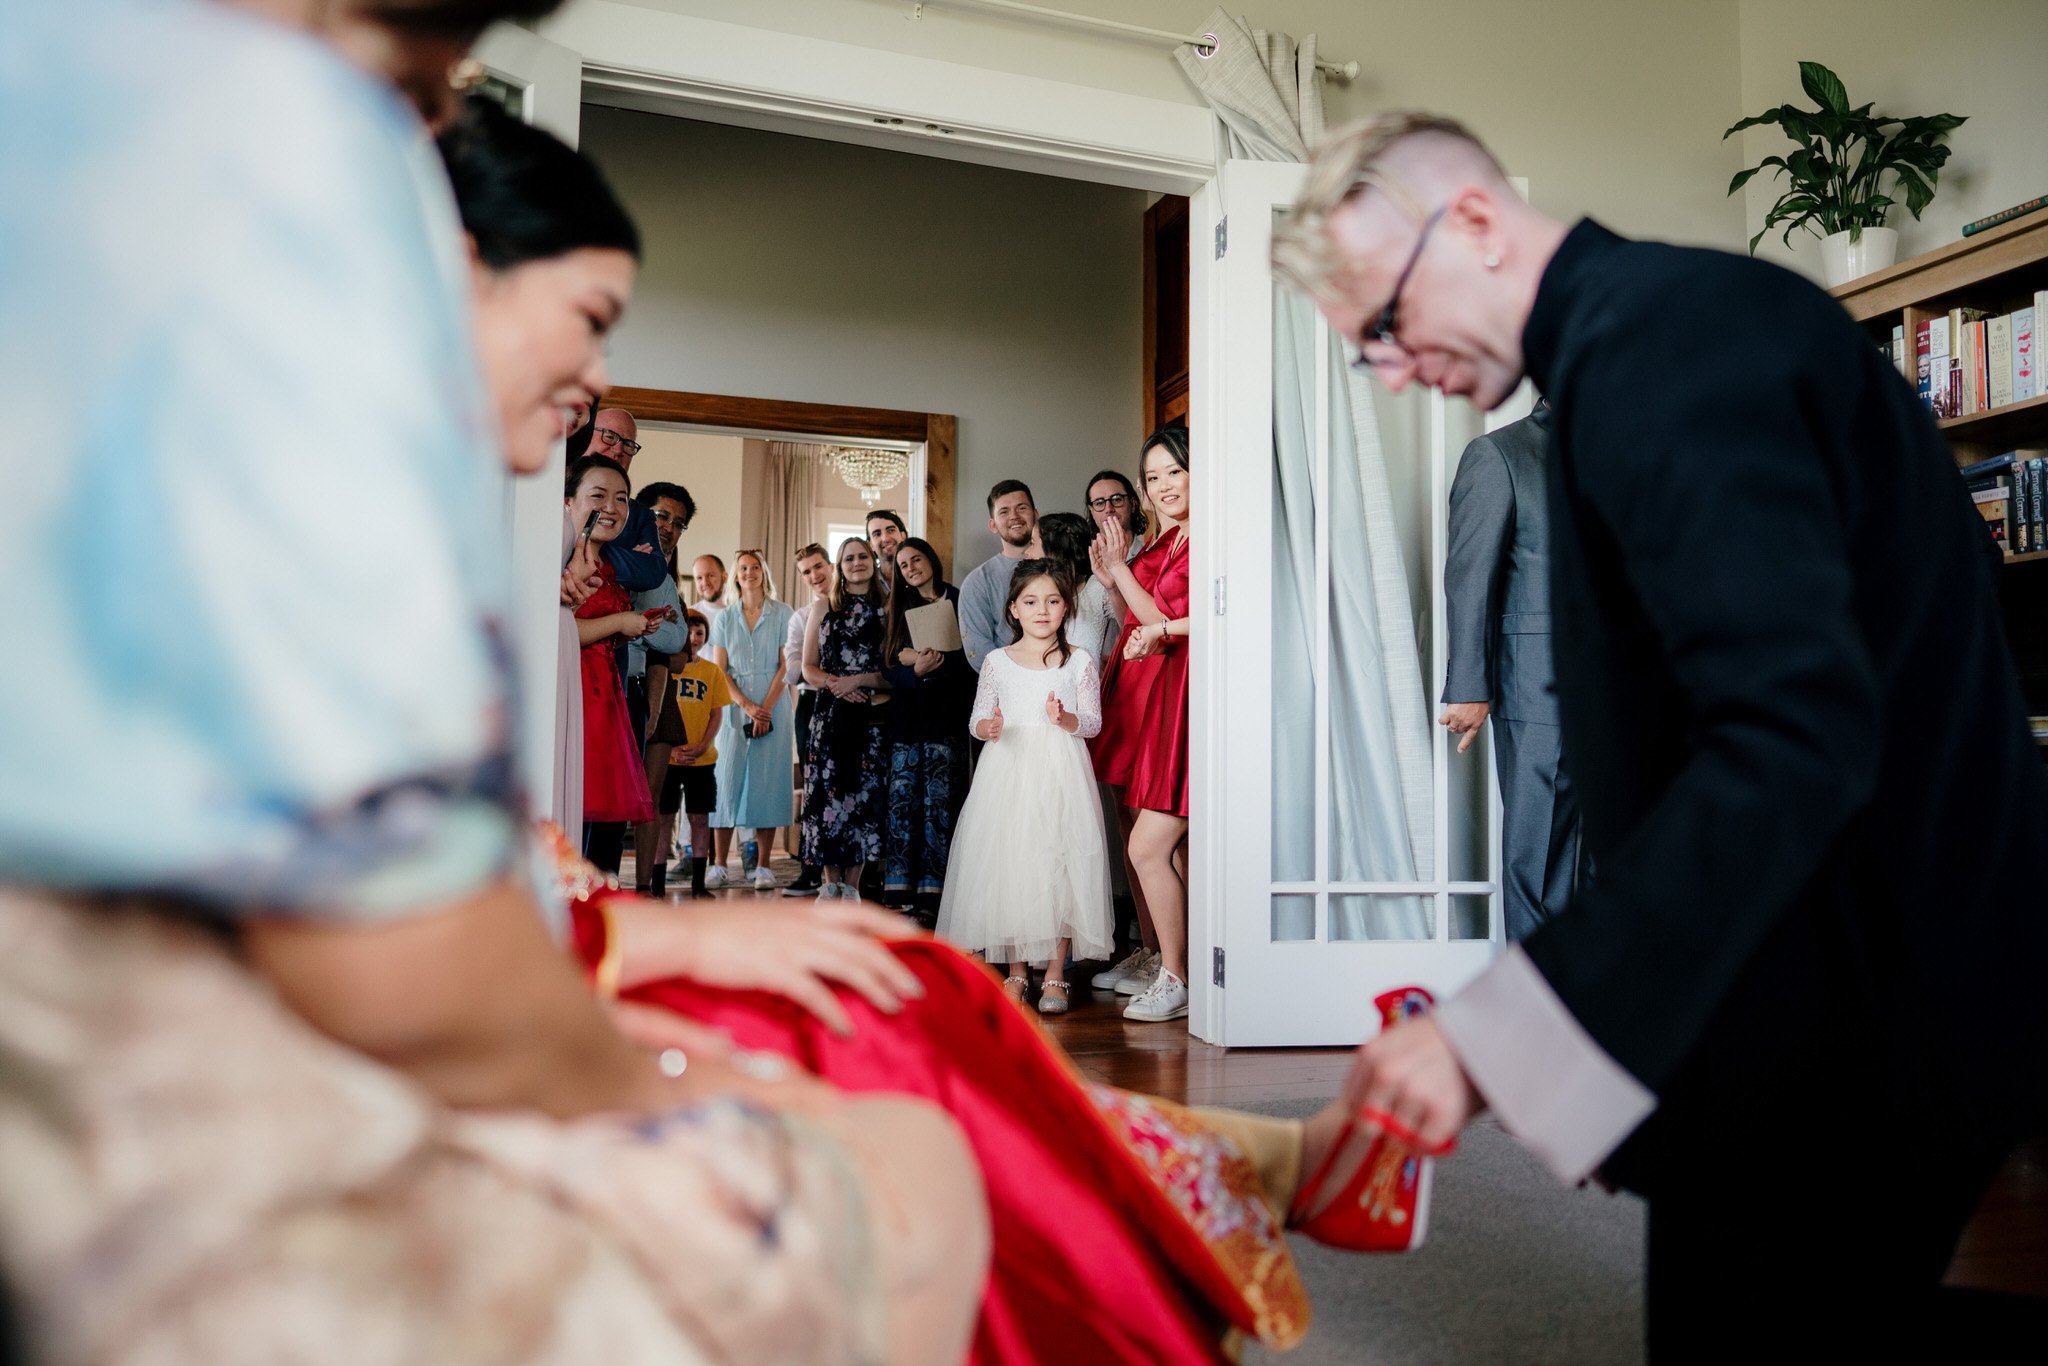 huntly-house-auckland-wedding-venue-mansion-vintage-luxury-accommodation-photographer-videography-dear-white-productions-photo-film-south-clarks-beach (21).jpg